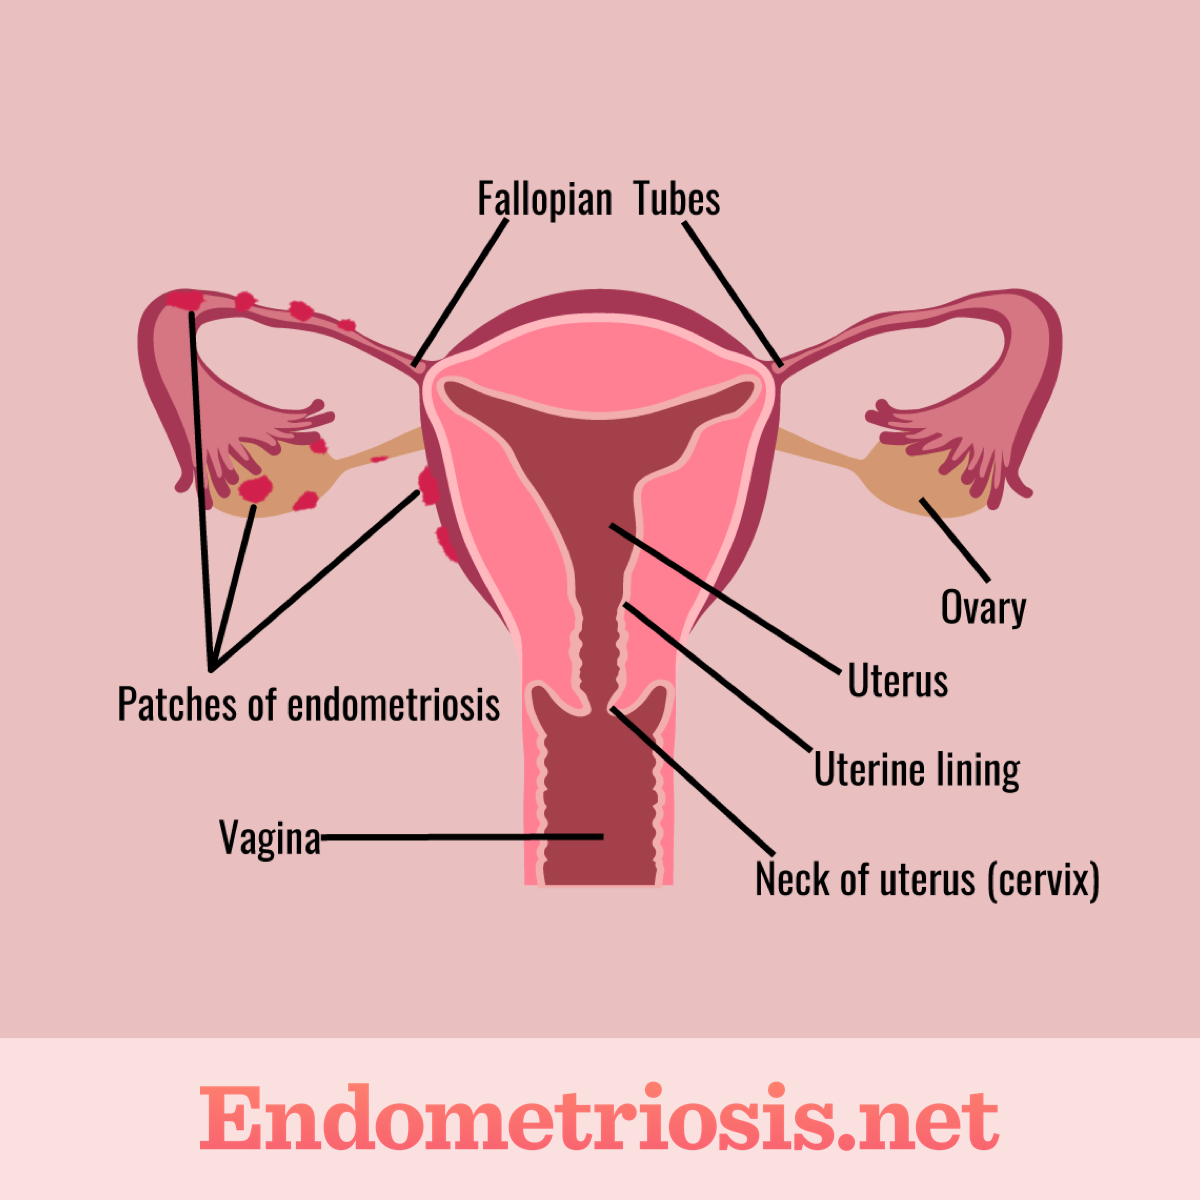 Female reproductive organs with patches of endometriosis lesions shown appearing on the ovaries and the fallopian tubes.